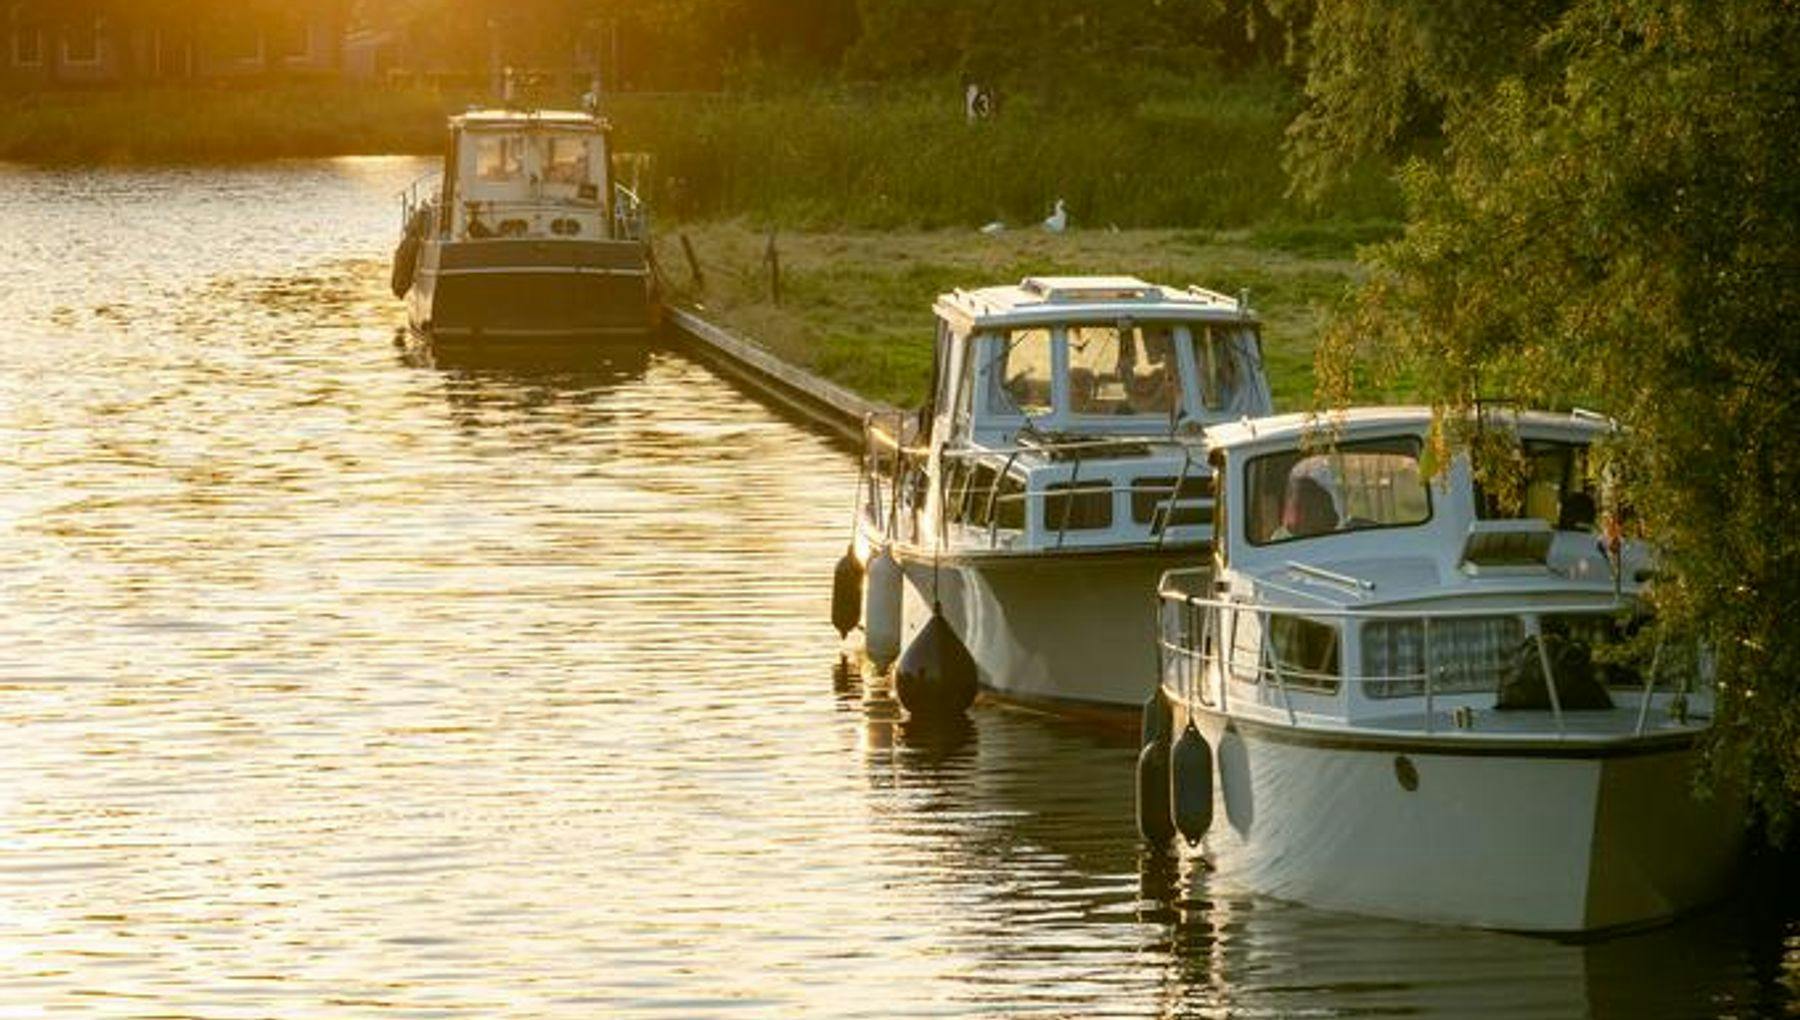 Docked boats at the Broek in Waterland lake